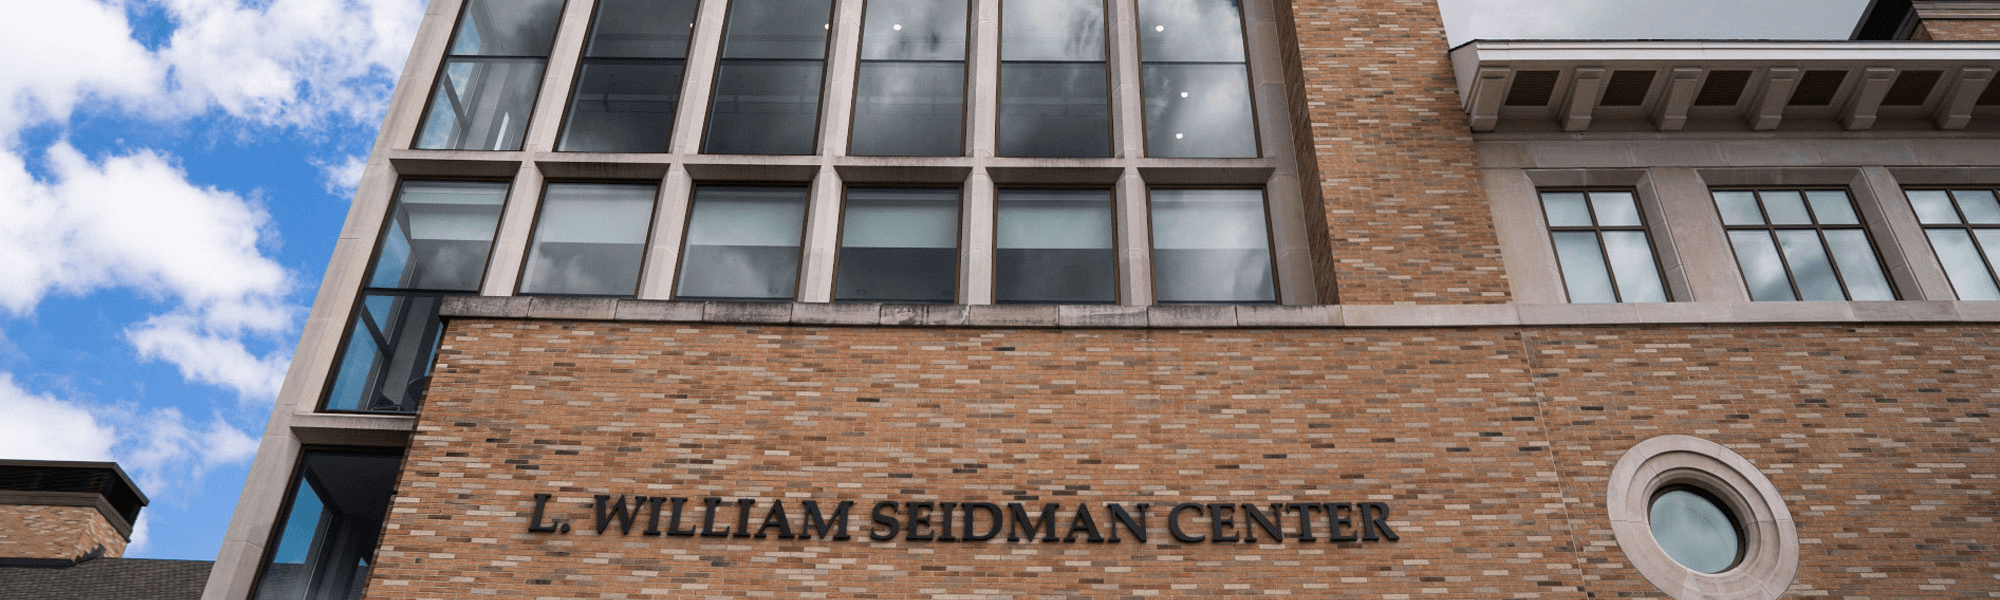 The L. William Seidman College of Business in downtown Grand Rapids.